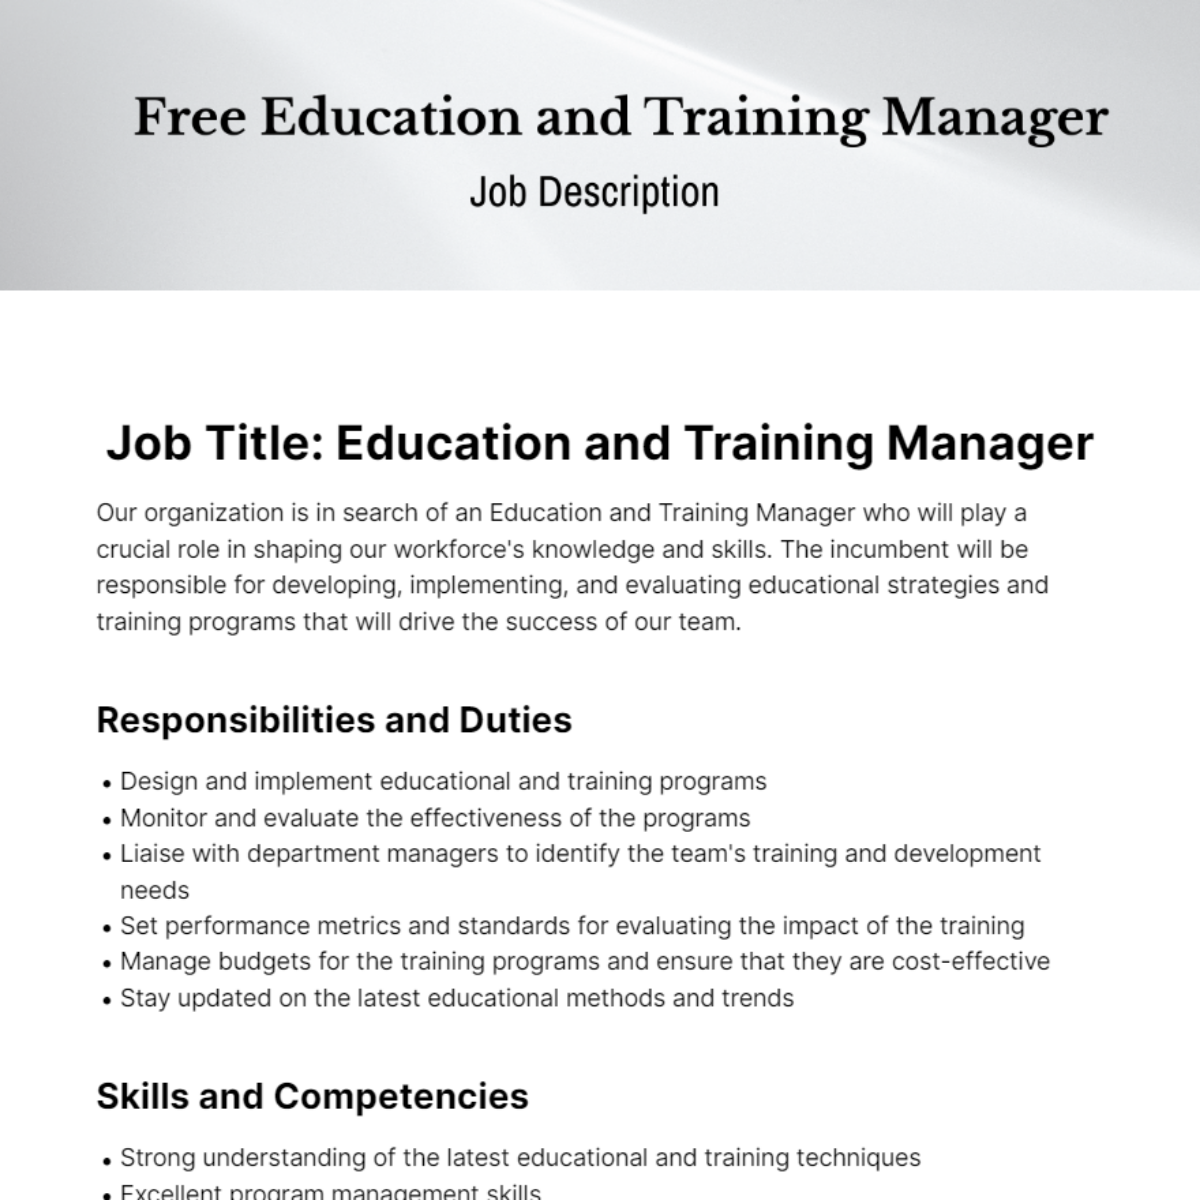 Free Education and Training Manager Job Description Template